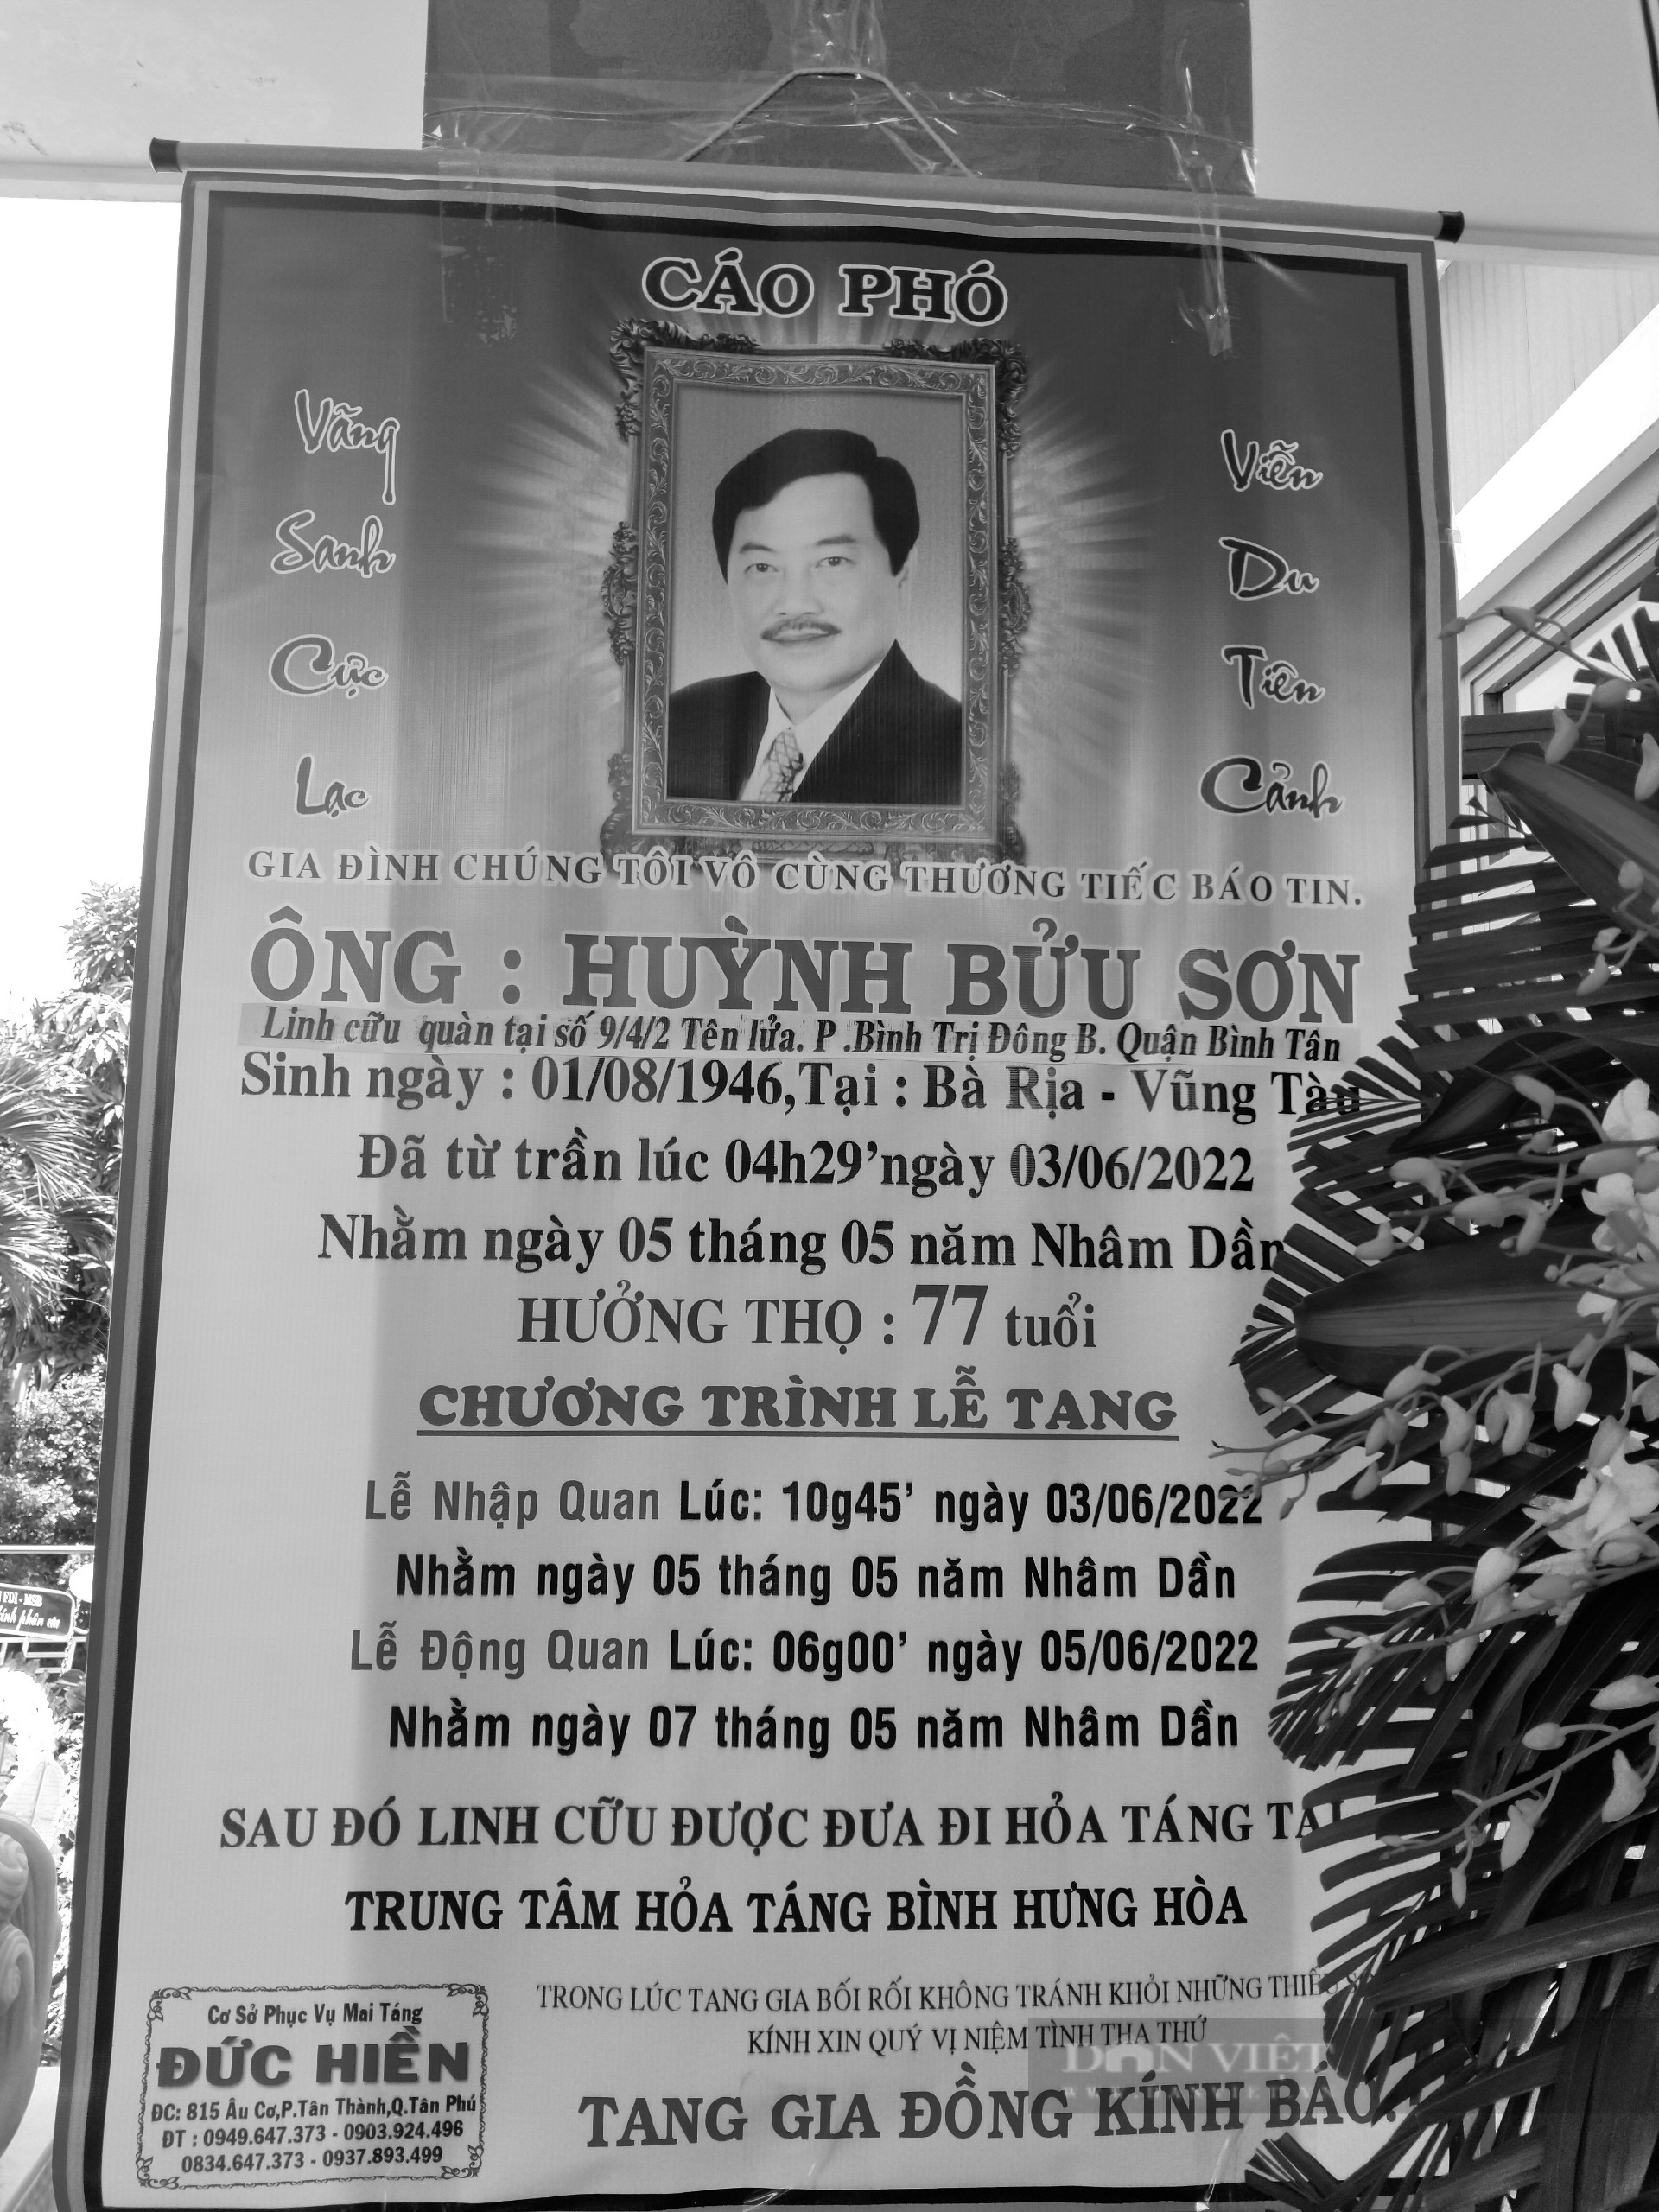 The late economic expert Huynh Buu Son shared proudly of his two children - Photo 4.